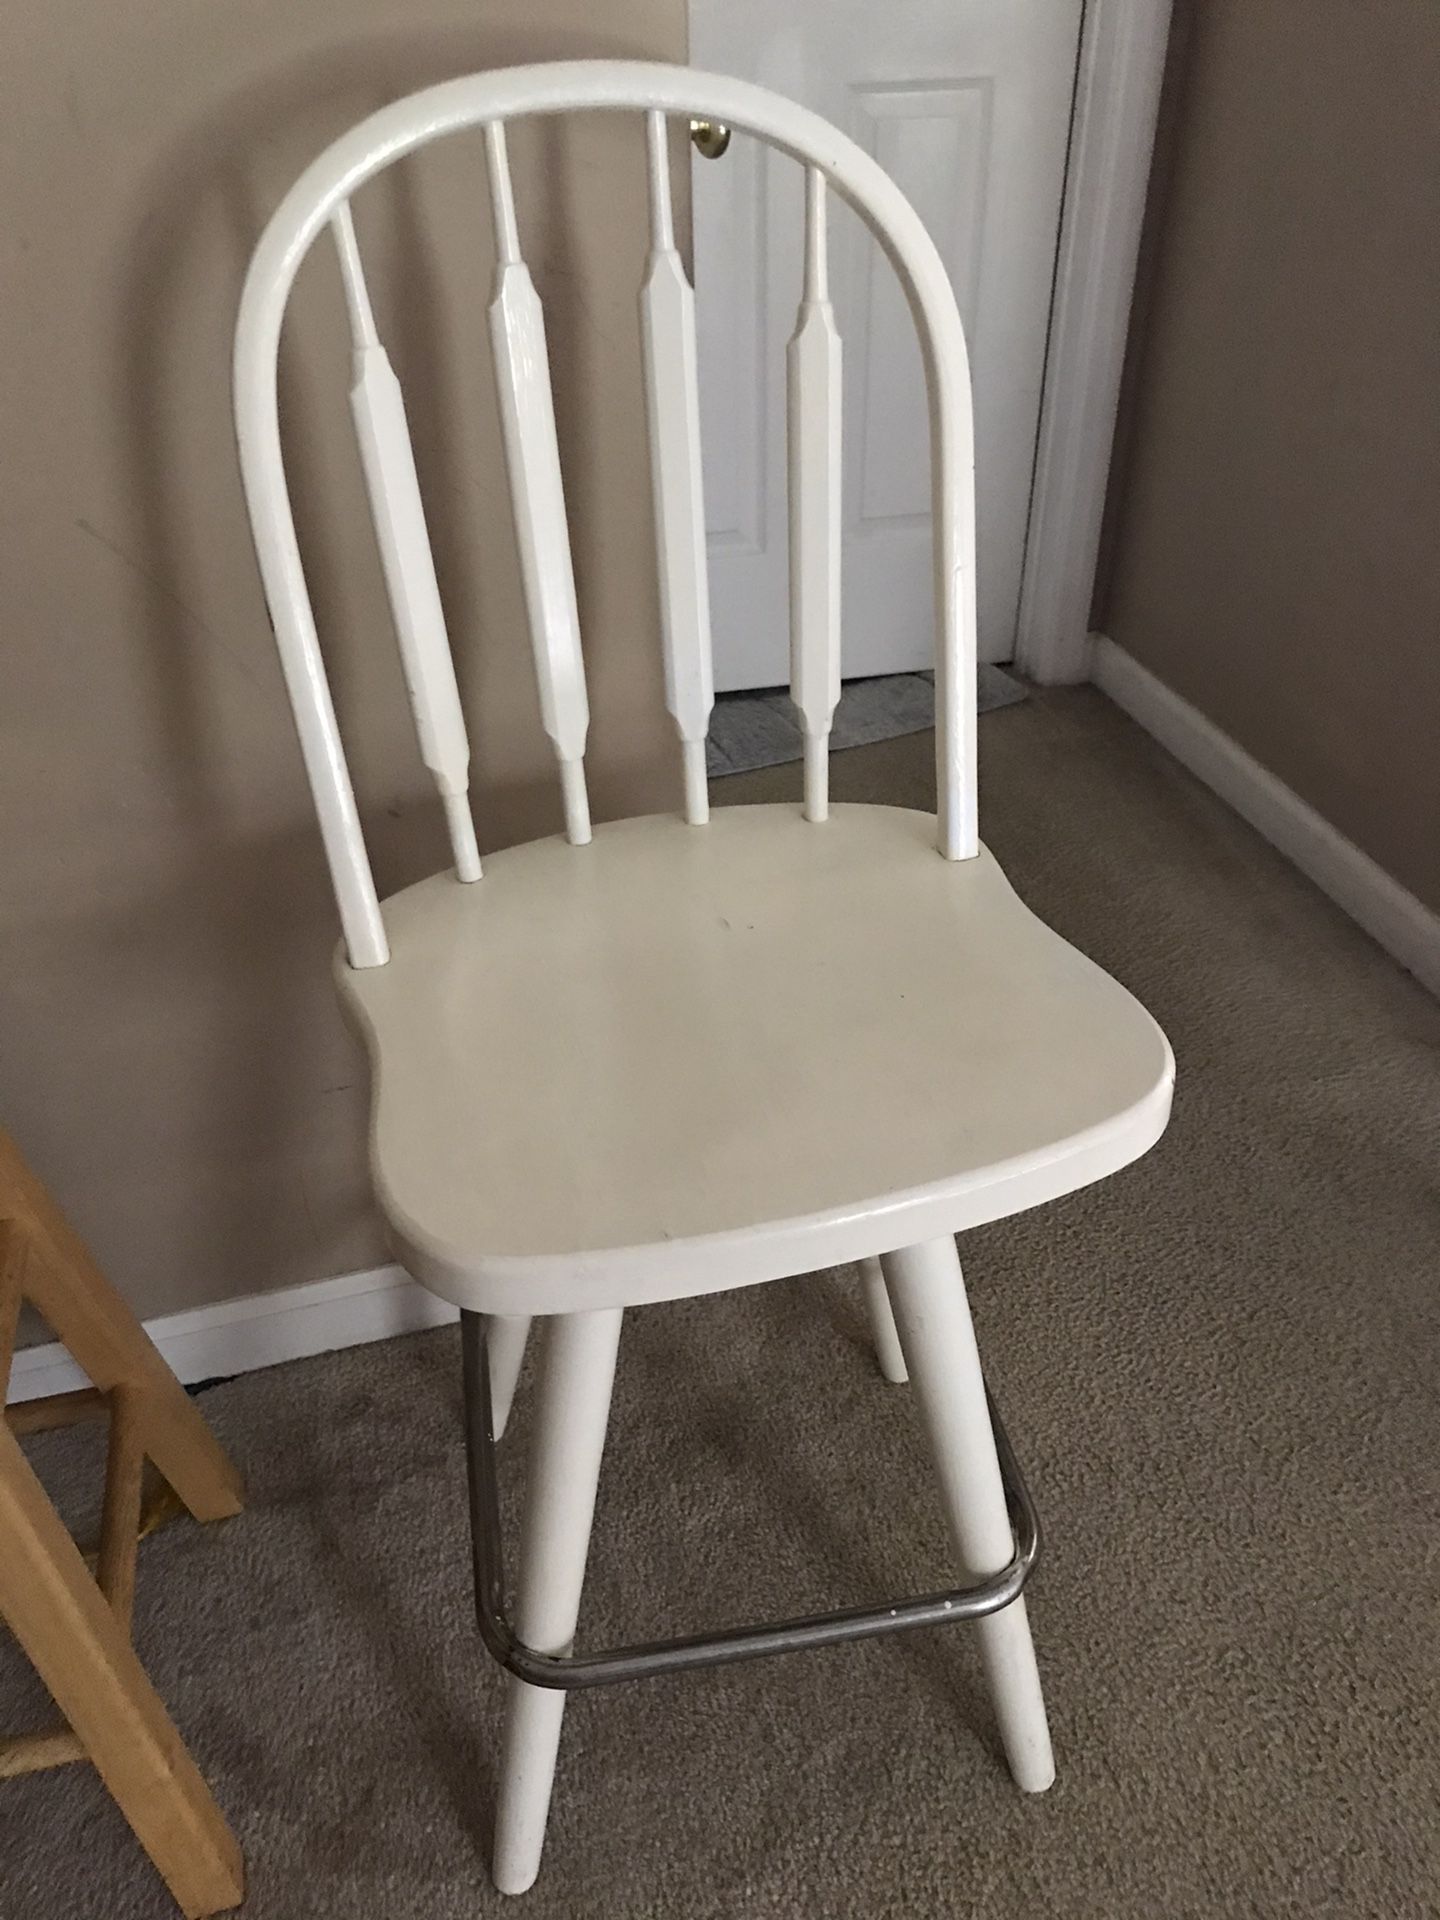 Wooden stool chair, good condition like new